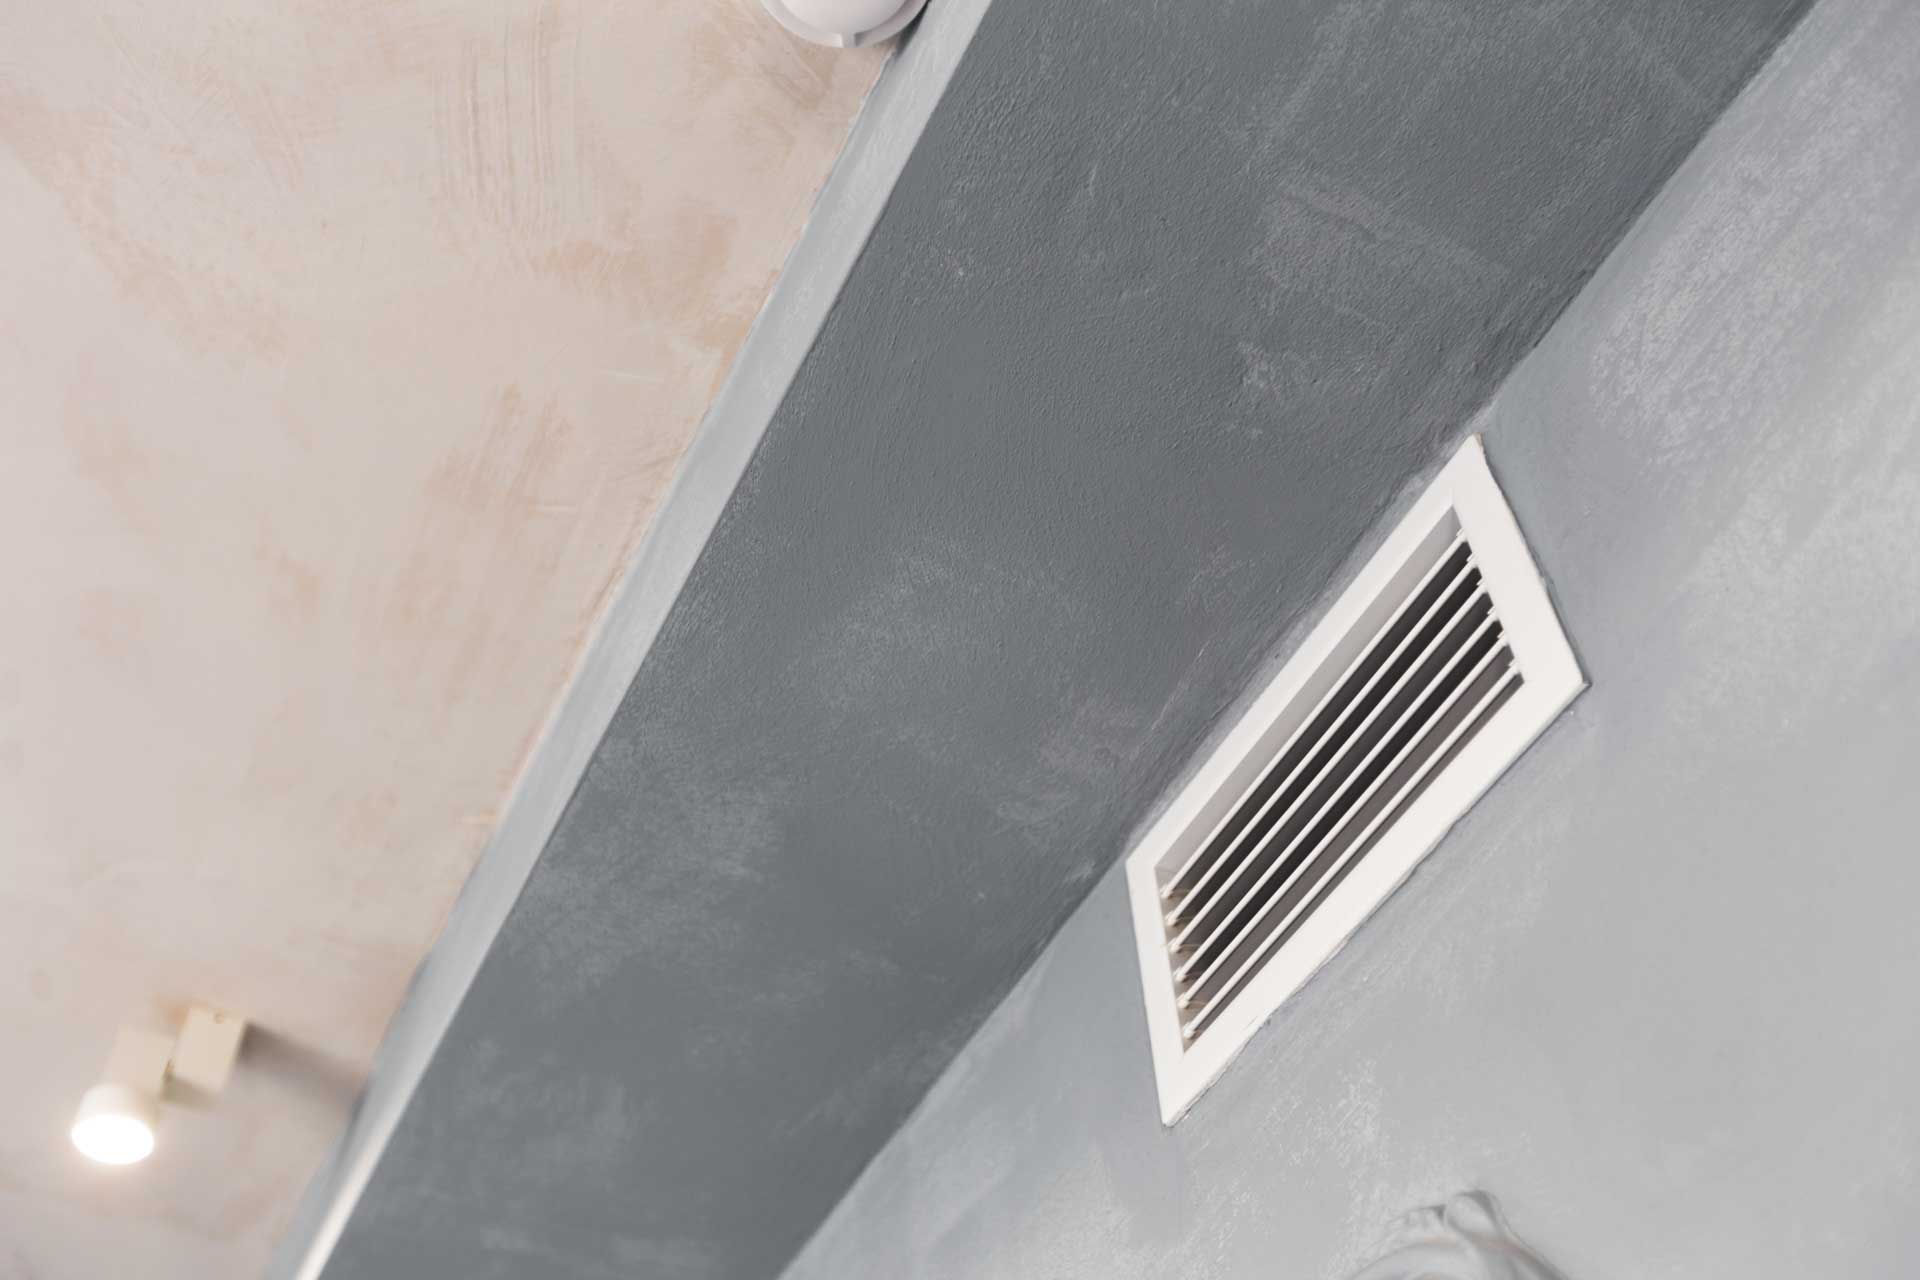 A ceiling-mounted hvac vent on a grey, textured surface with tub replacement and recessed lighting visible in the background.